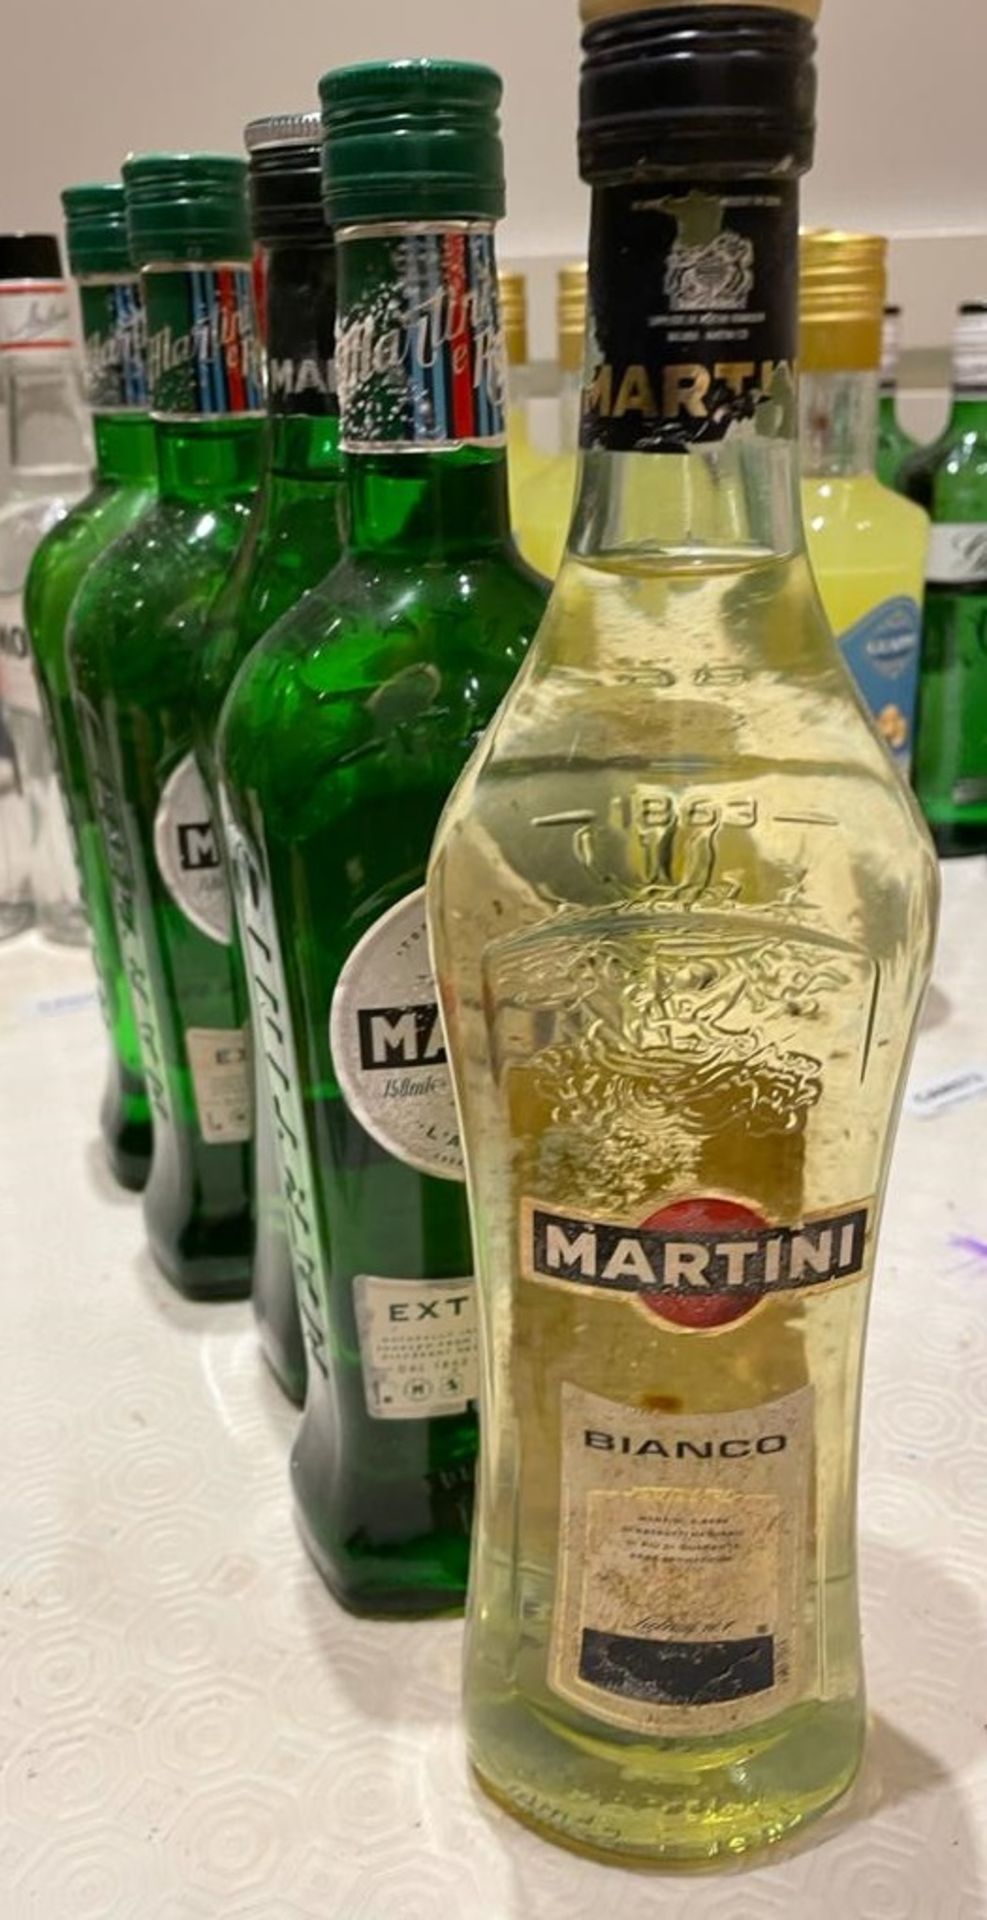 5 x Bottles Of MARTINI - Lot Includes 4 x Extra Dry + 1 x Bianco - New/Unopened Restaurant Stock -